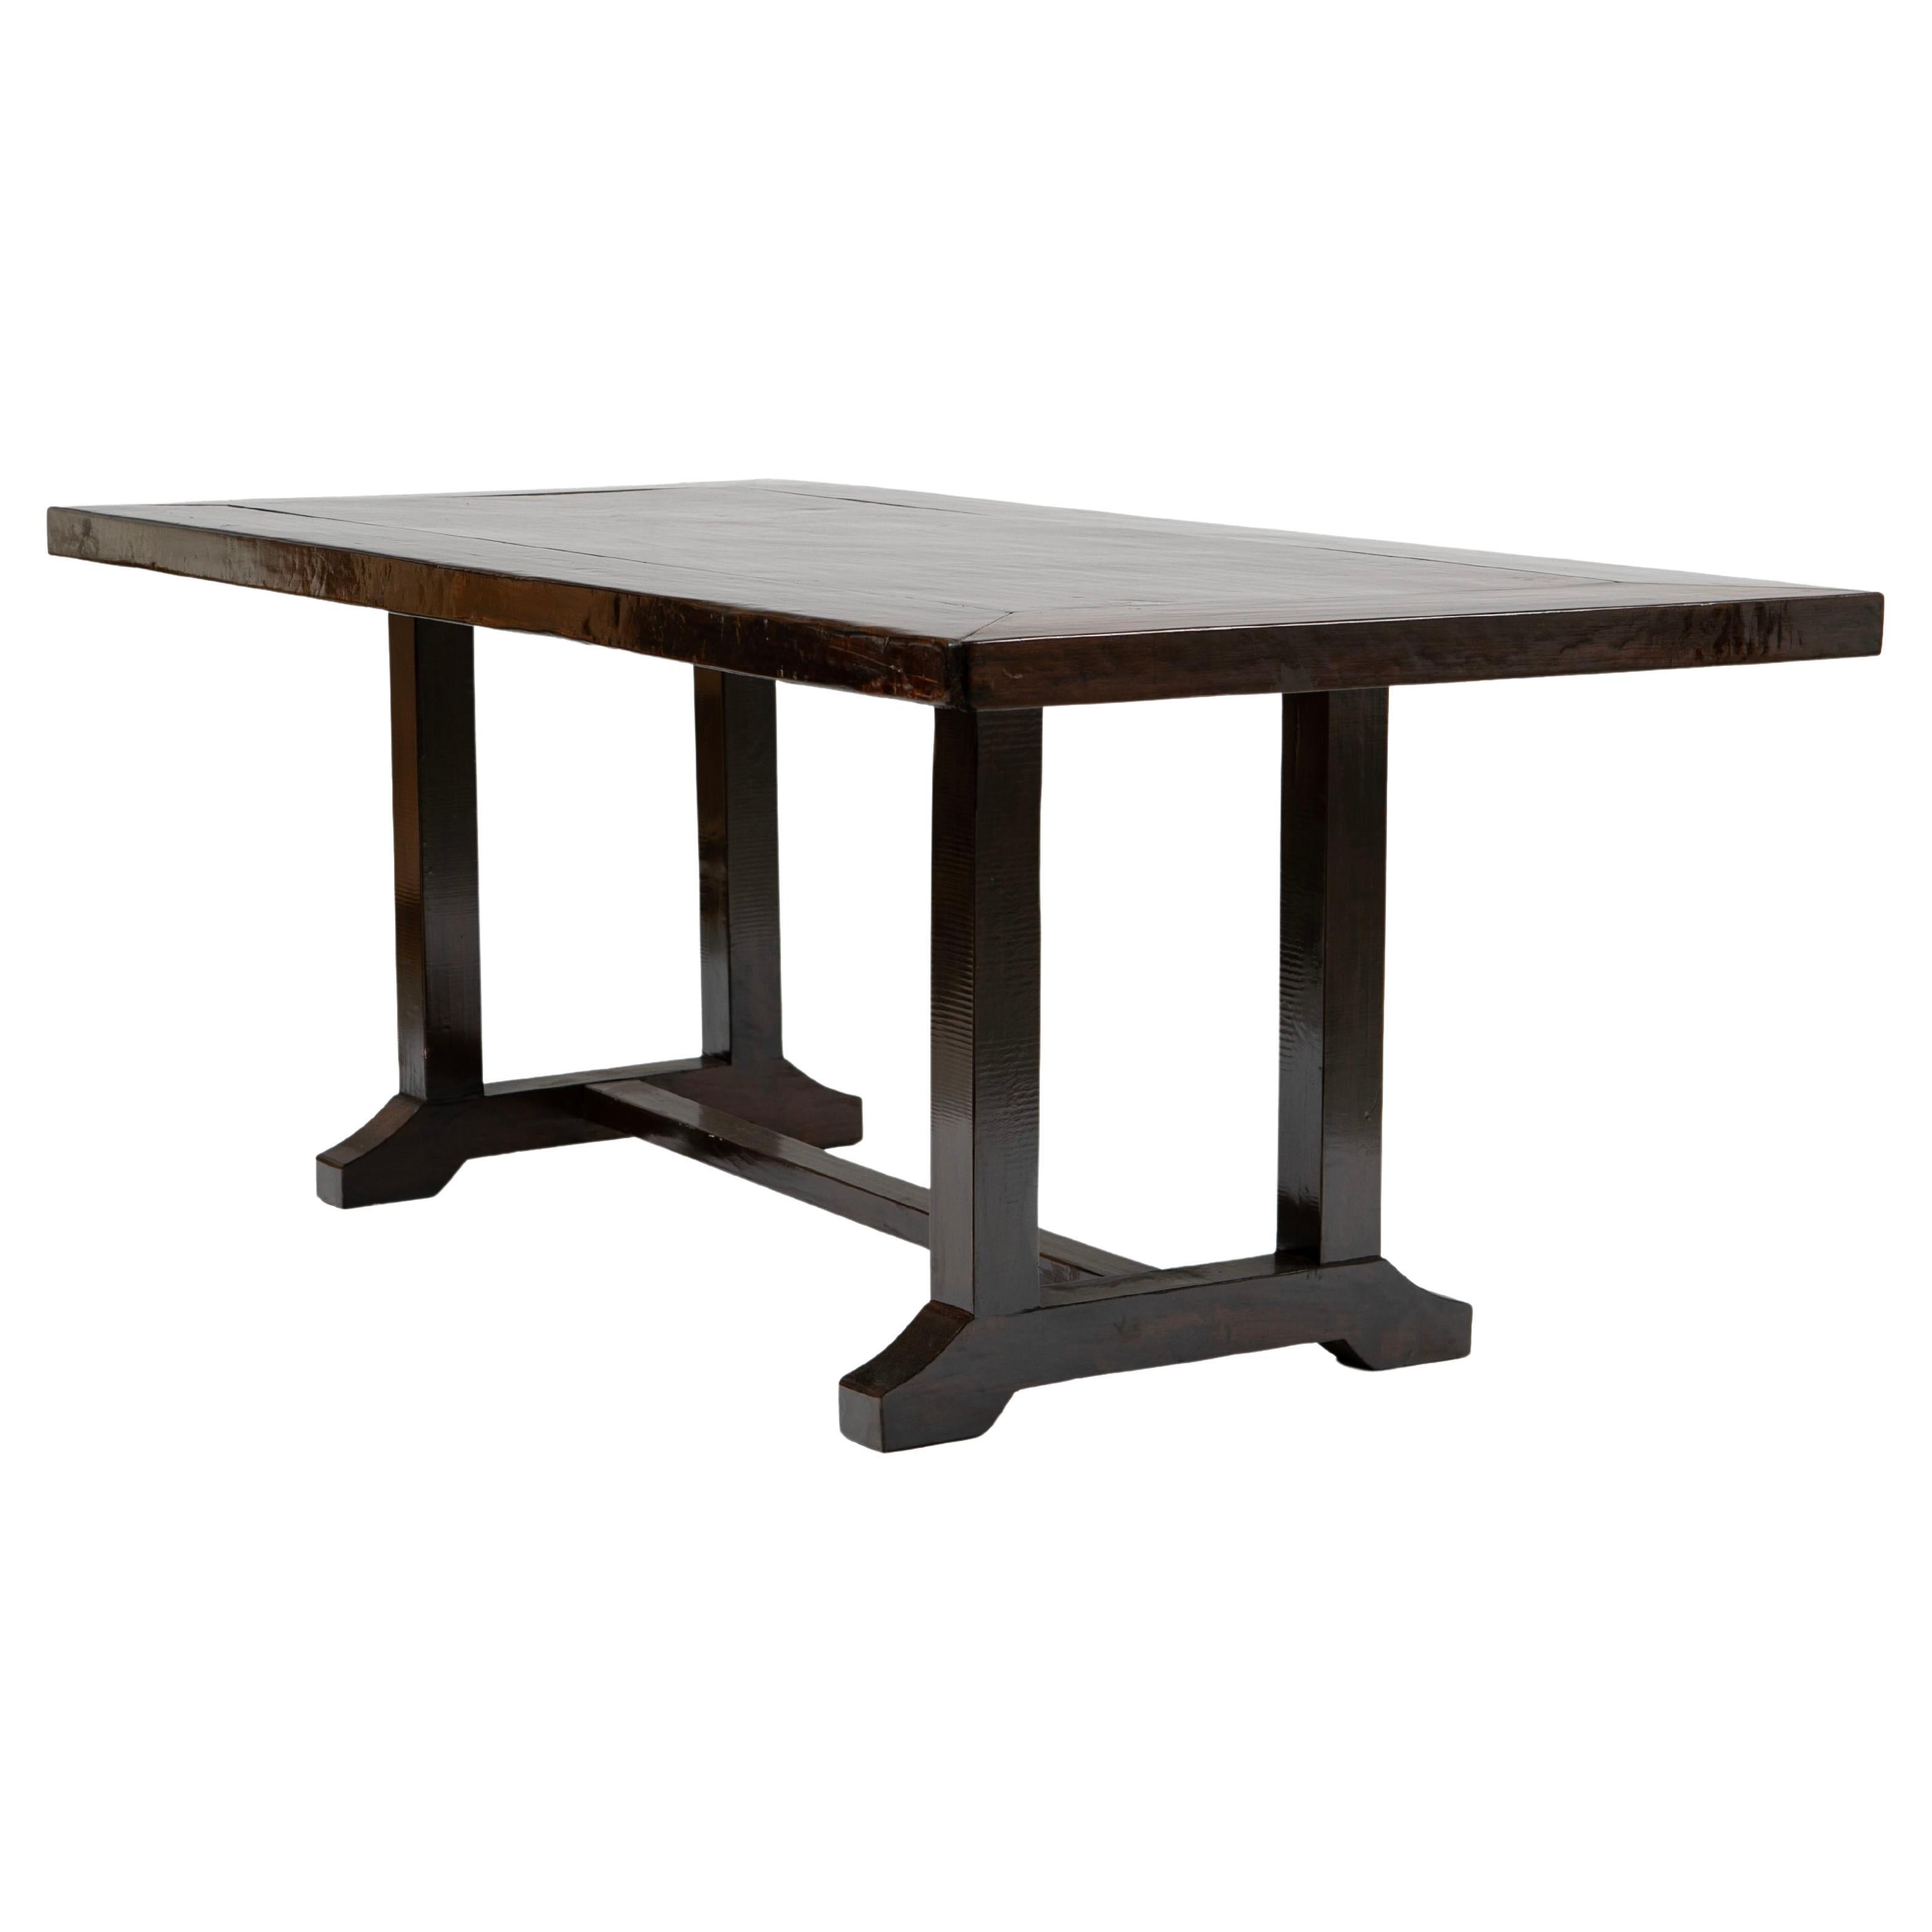 Spanish Colonial Dining Table in Narra Hardwood 19'th ctr